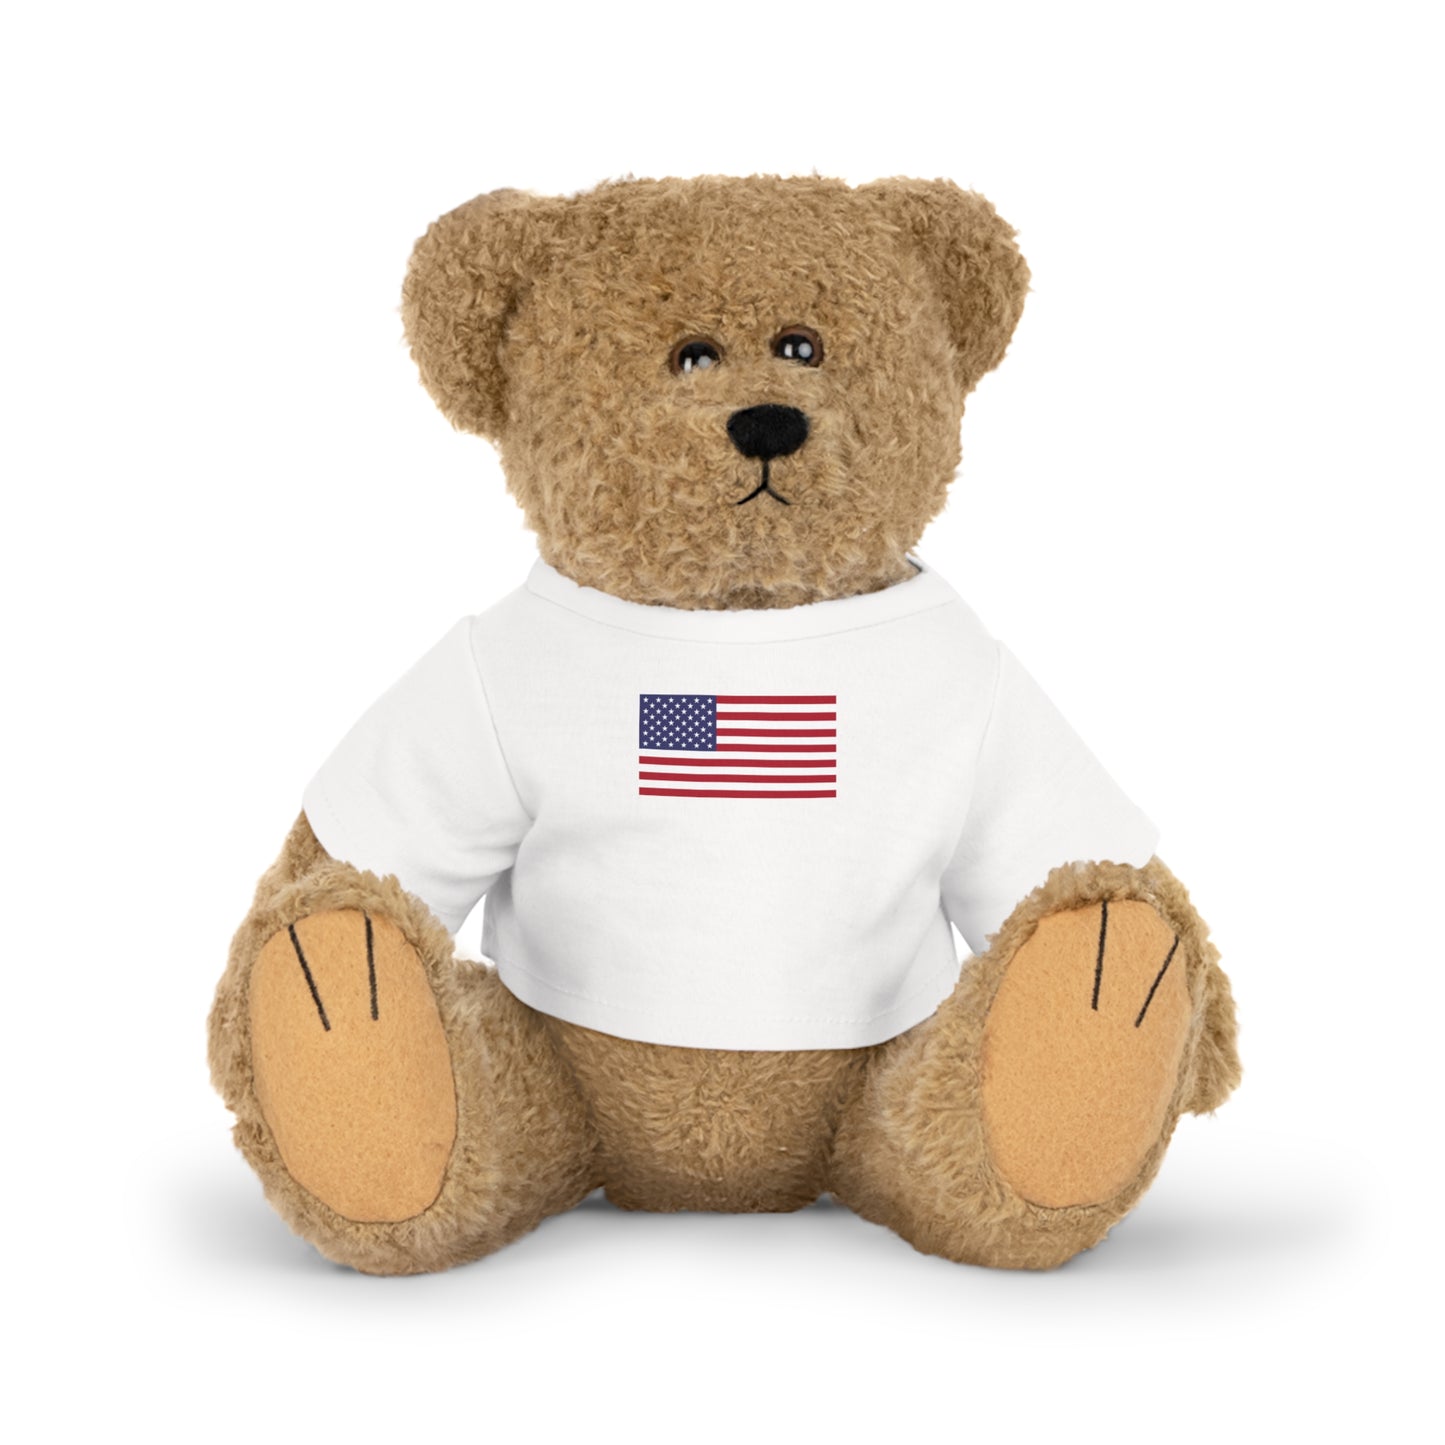 Plush Toy with American Flag Shirt